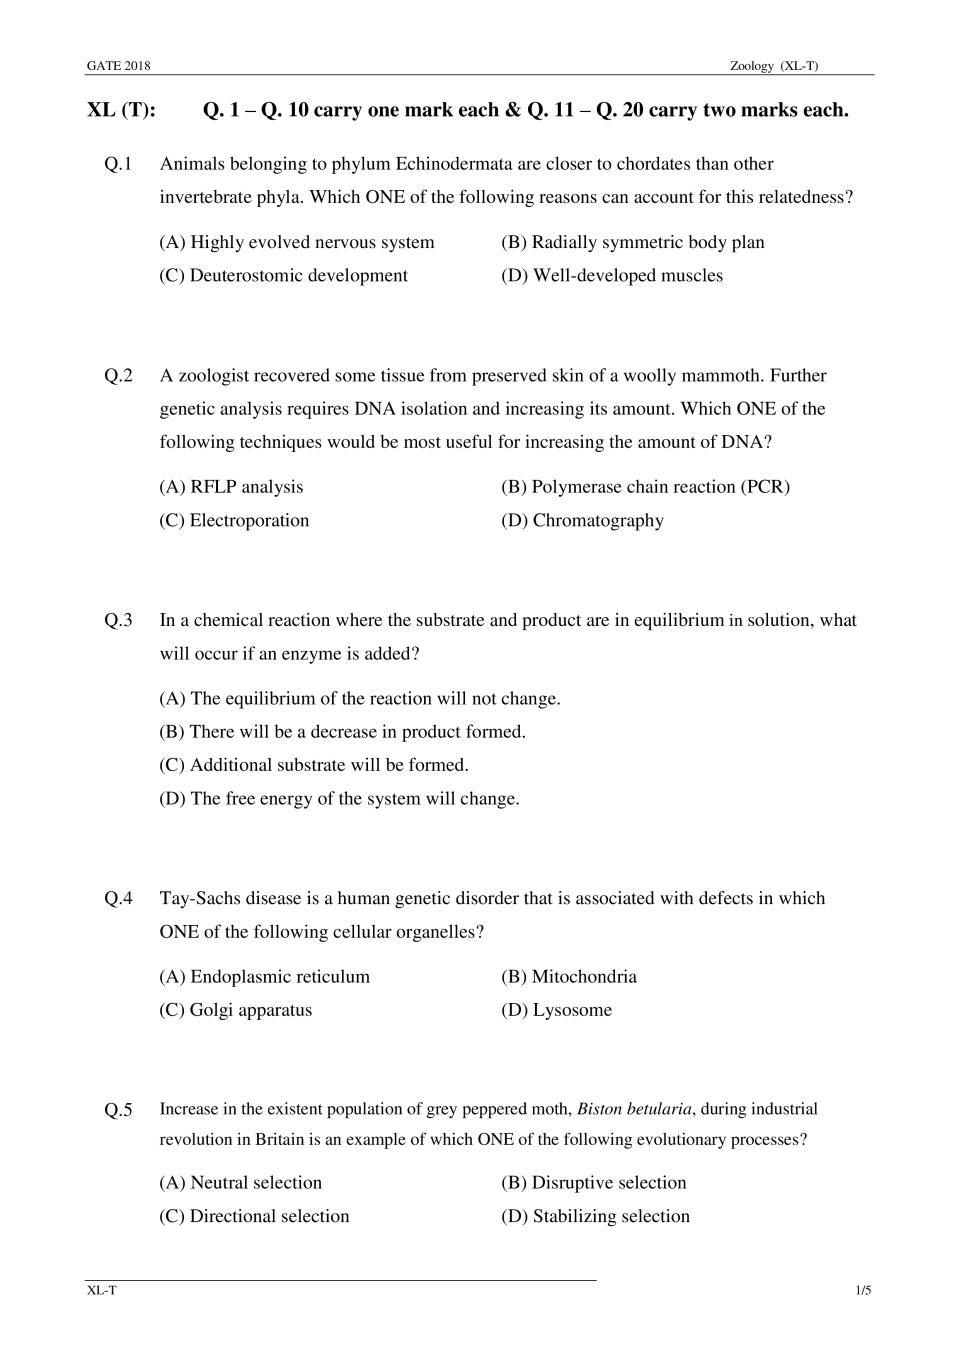 GATE 2018 Zoology (XL-T) Question Paper with Answer - Page 1